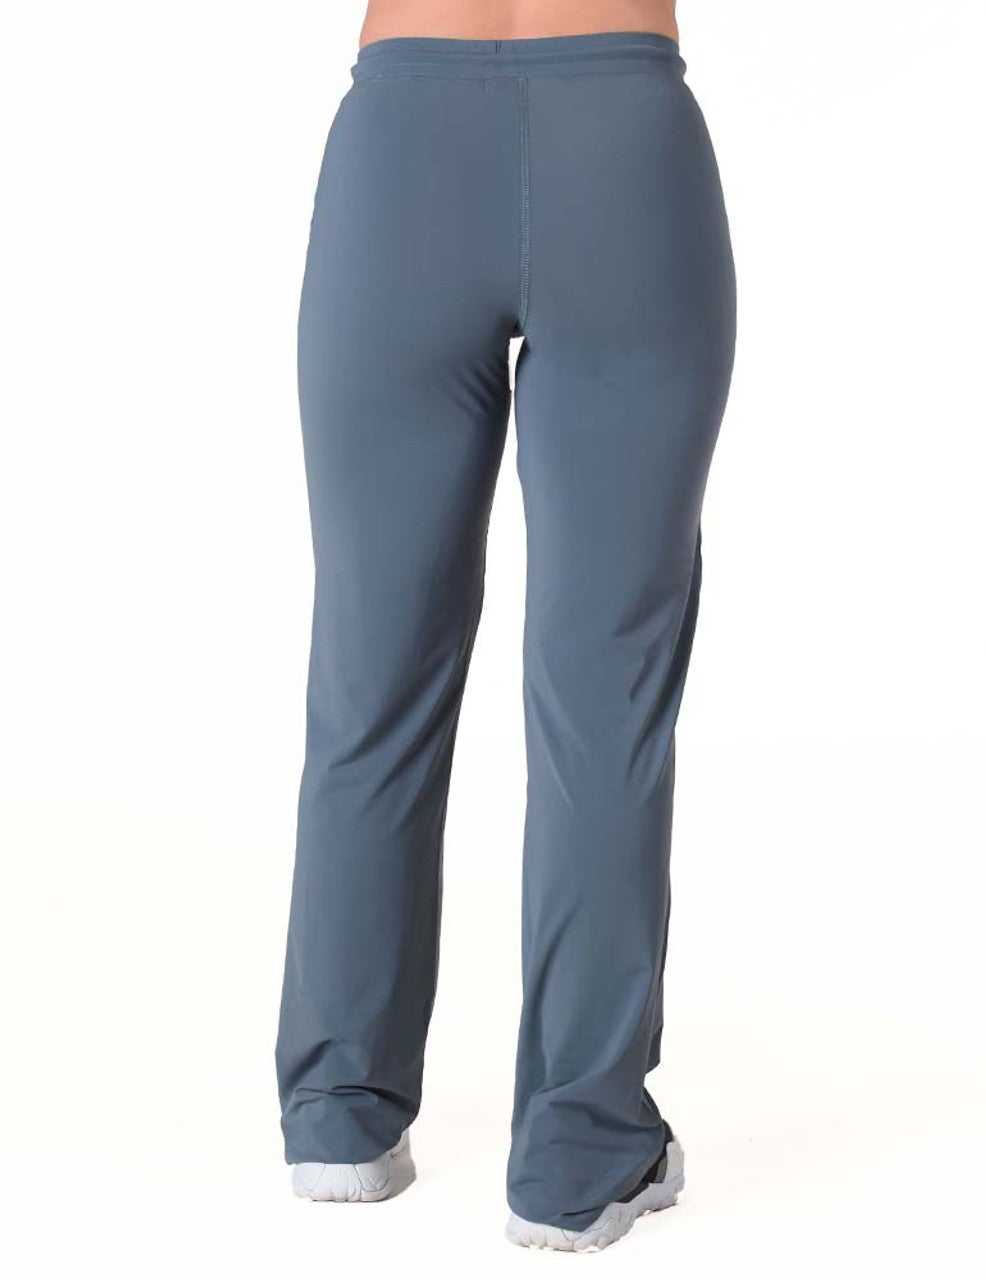 COWGIRL TUFF Ladies Steel Gray Breathe Instant Cooling UPF Pants